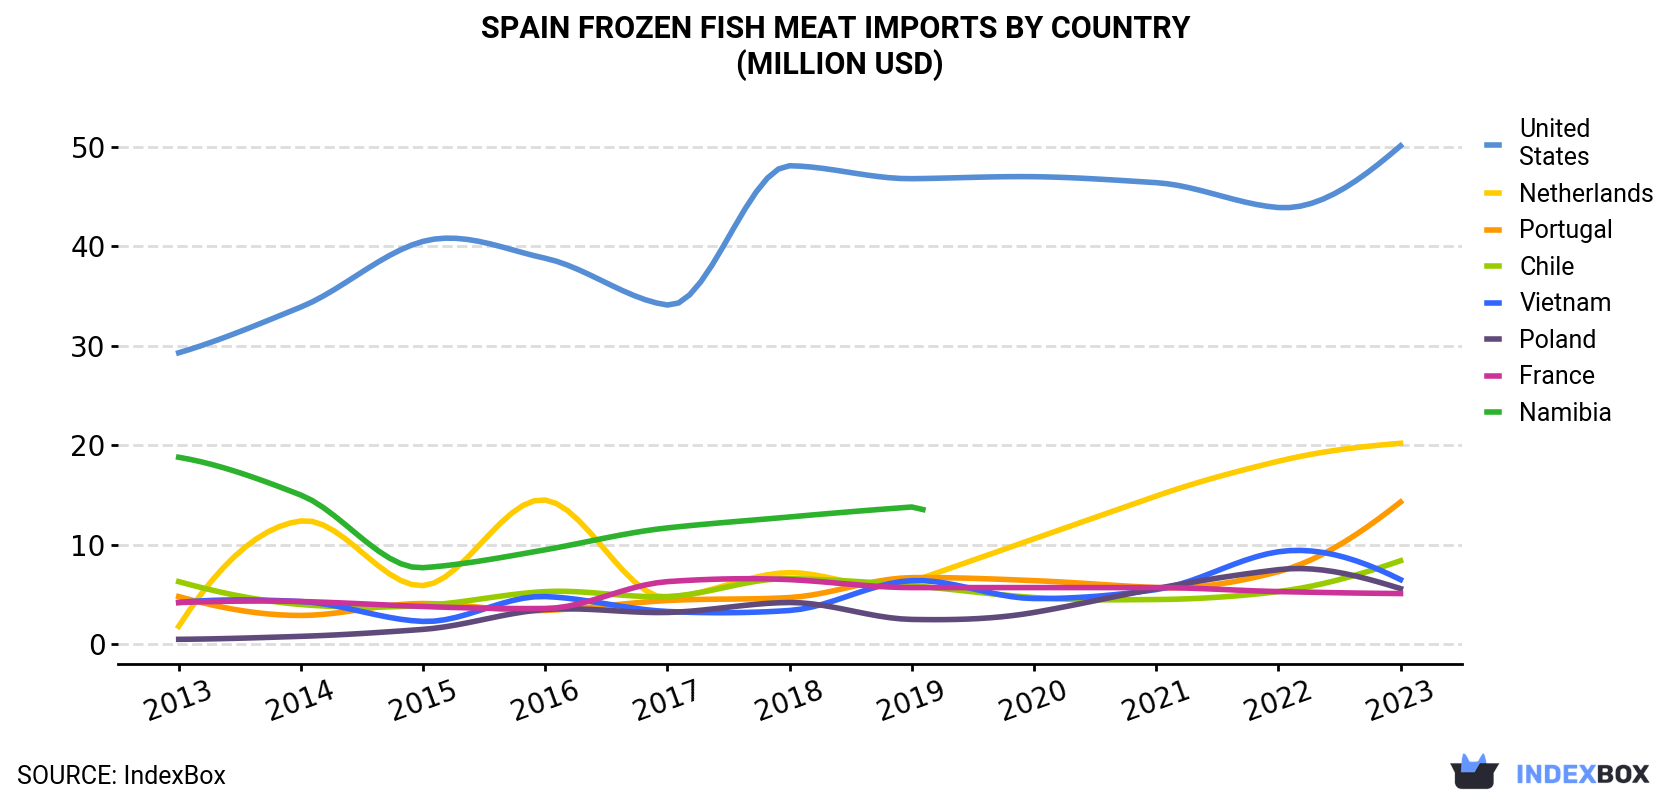 Spain Frozen Fish Meat Imports By Country (Million USD)